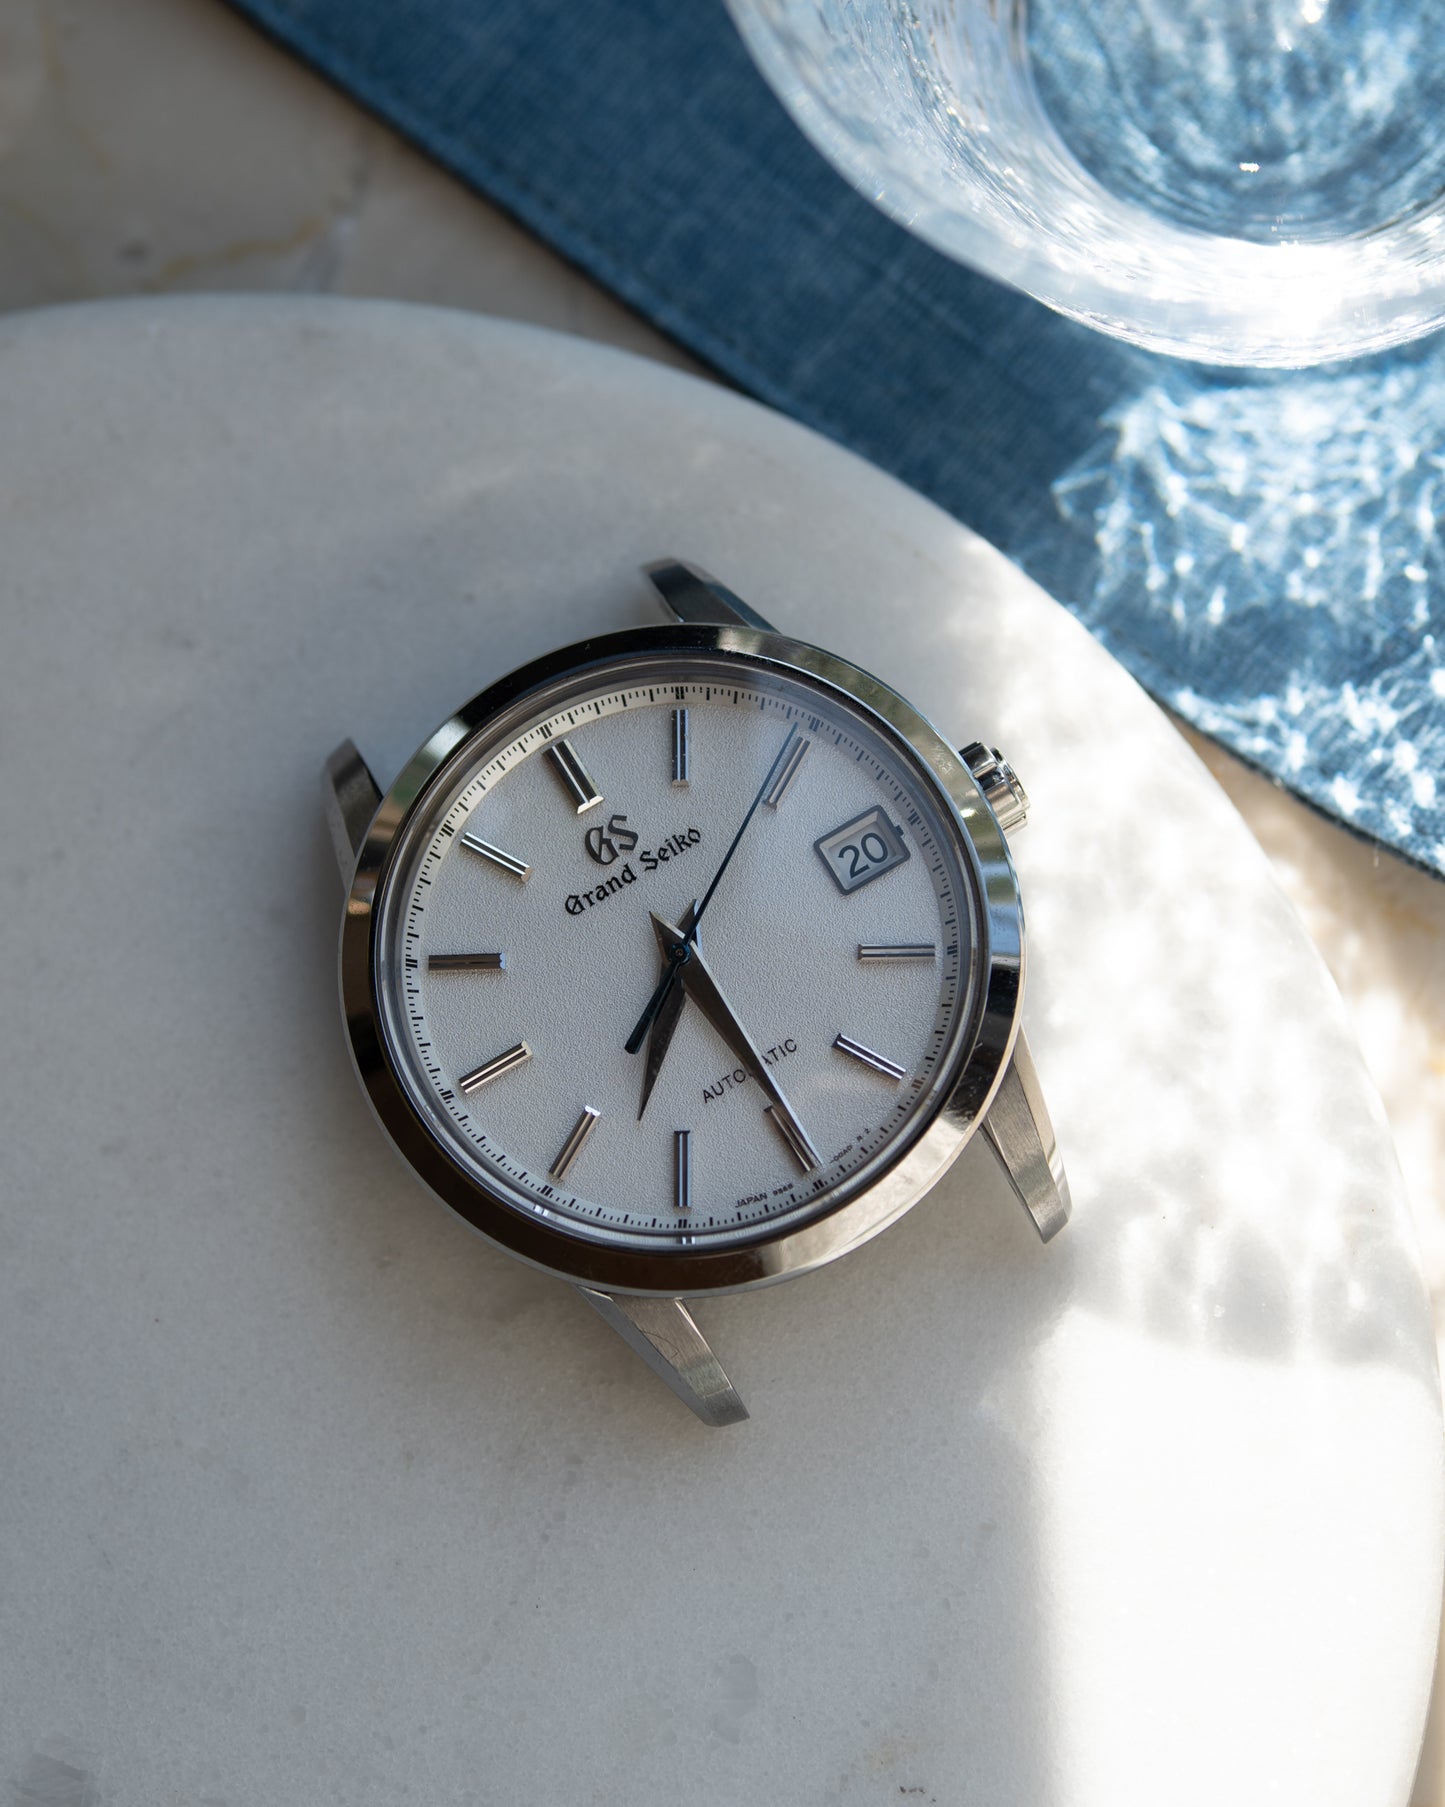 Grand Seiko SBGR305 sand texture dial Limited to 965 pieces